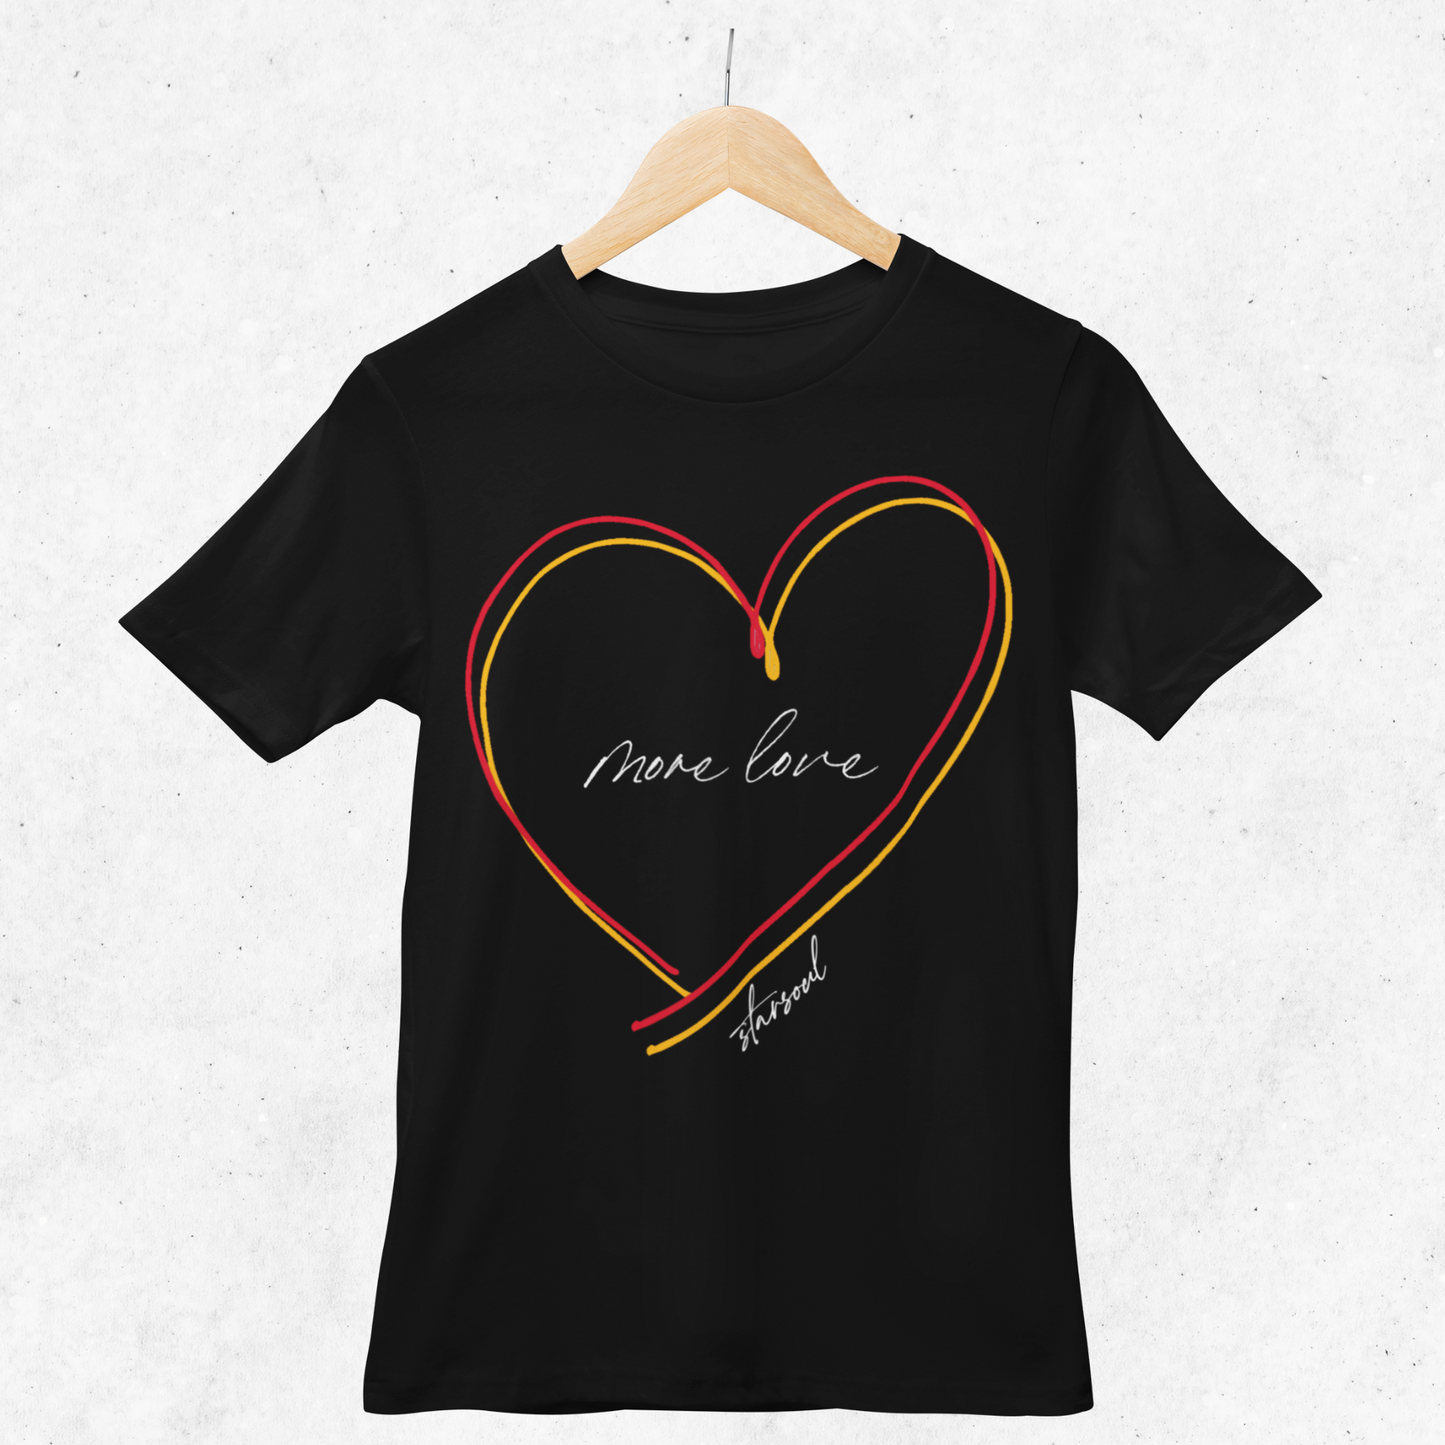 black shirt with yellow and red heart (text: more love).Every purchase from the #KCstrong collection donates 100% of the proceeds to the Kansas City Strong emergency fund created by the Chiefs and the United Way of Kansas City.